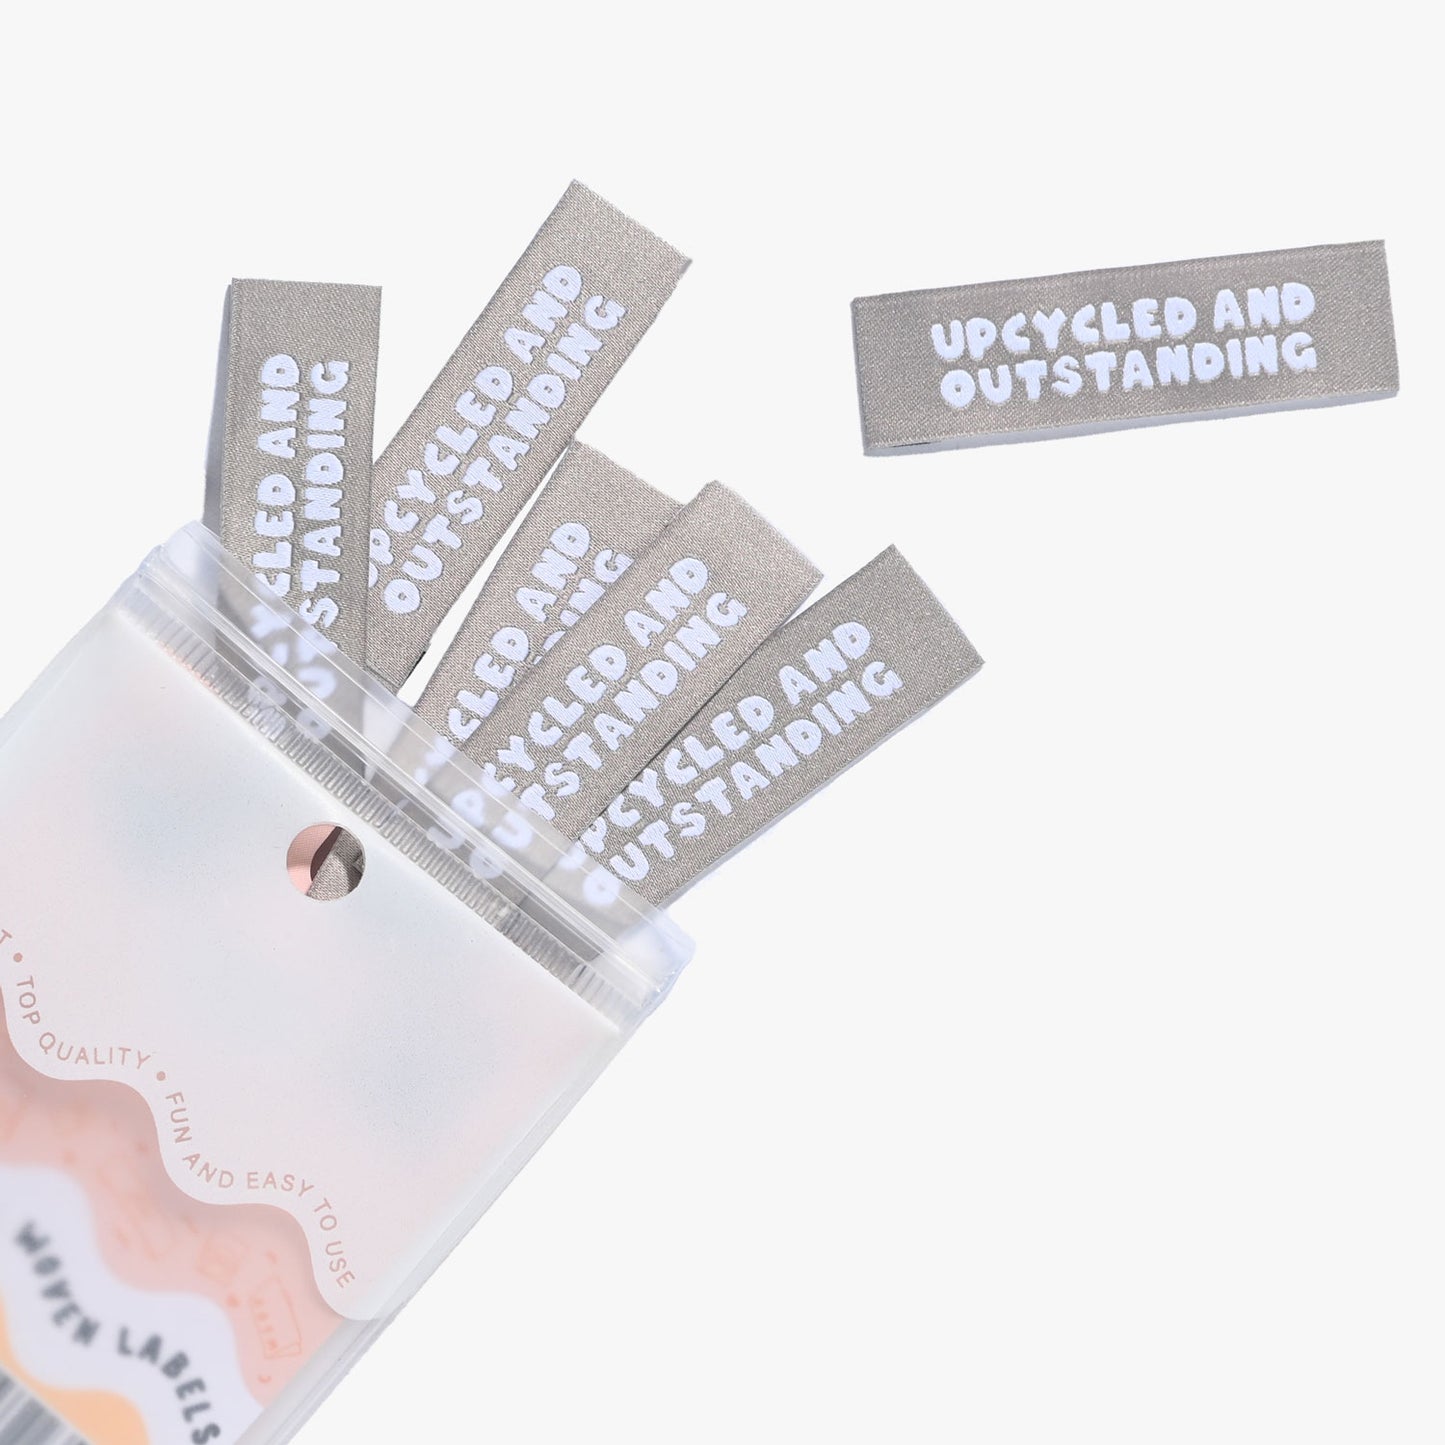 Kylie and the Machine - Woven labels - "Upcycled and Outstanding"